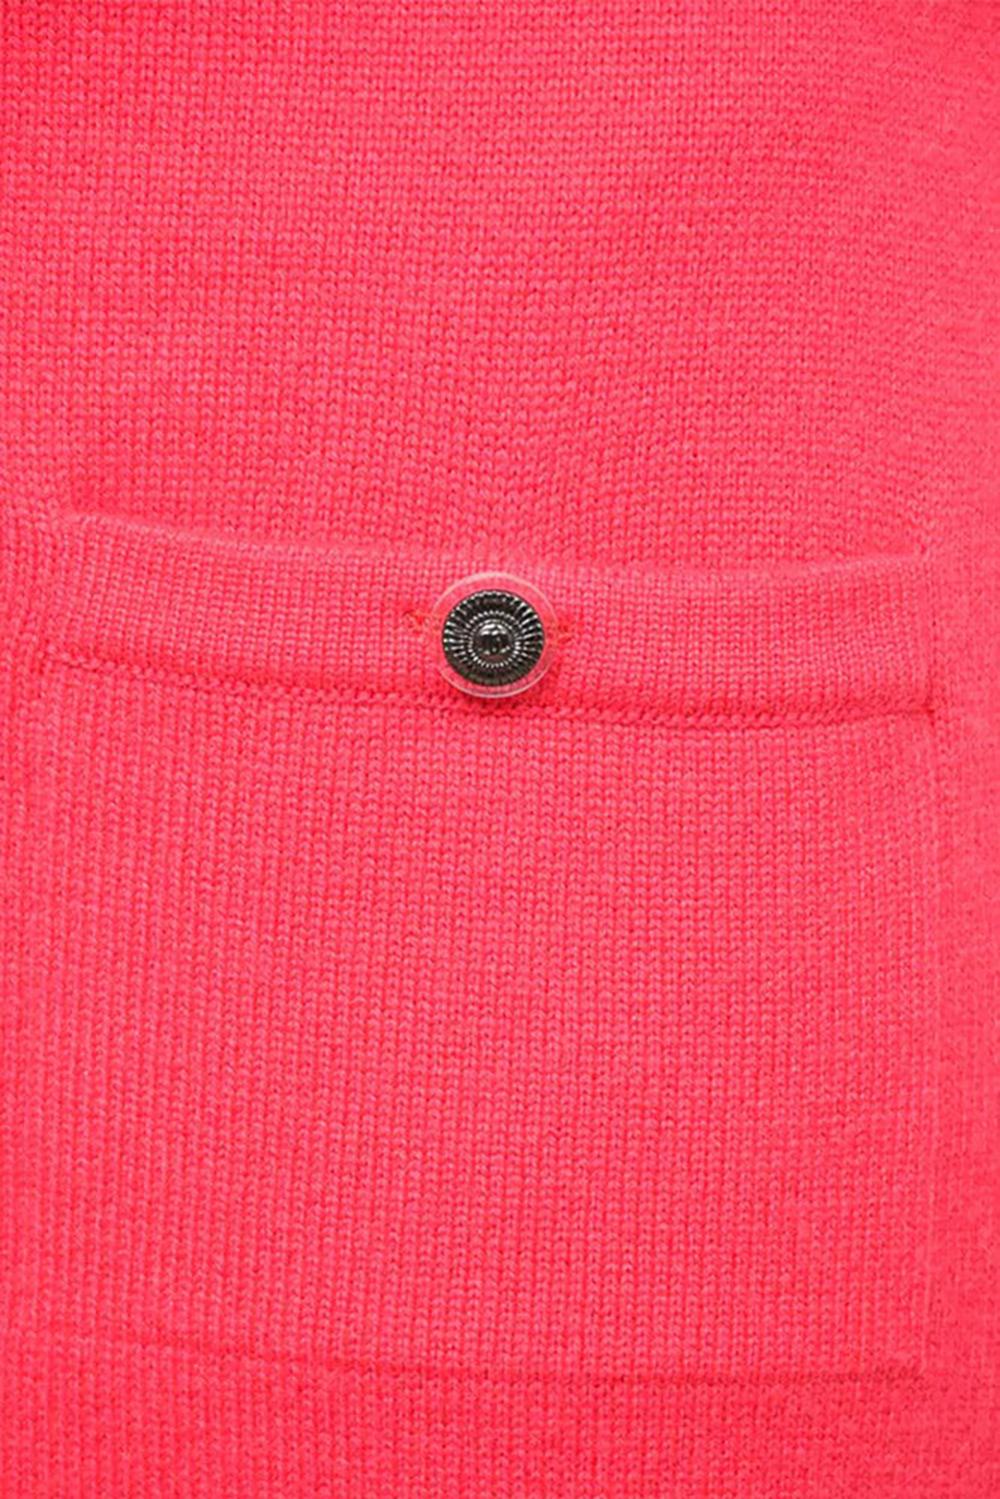 Women's or Men's Chanel CC Patch Candy Pink Cashmere Dress For Sale